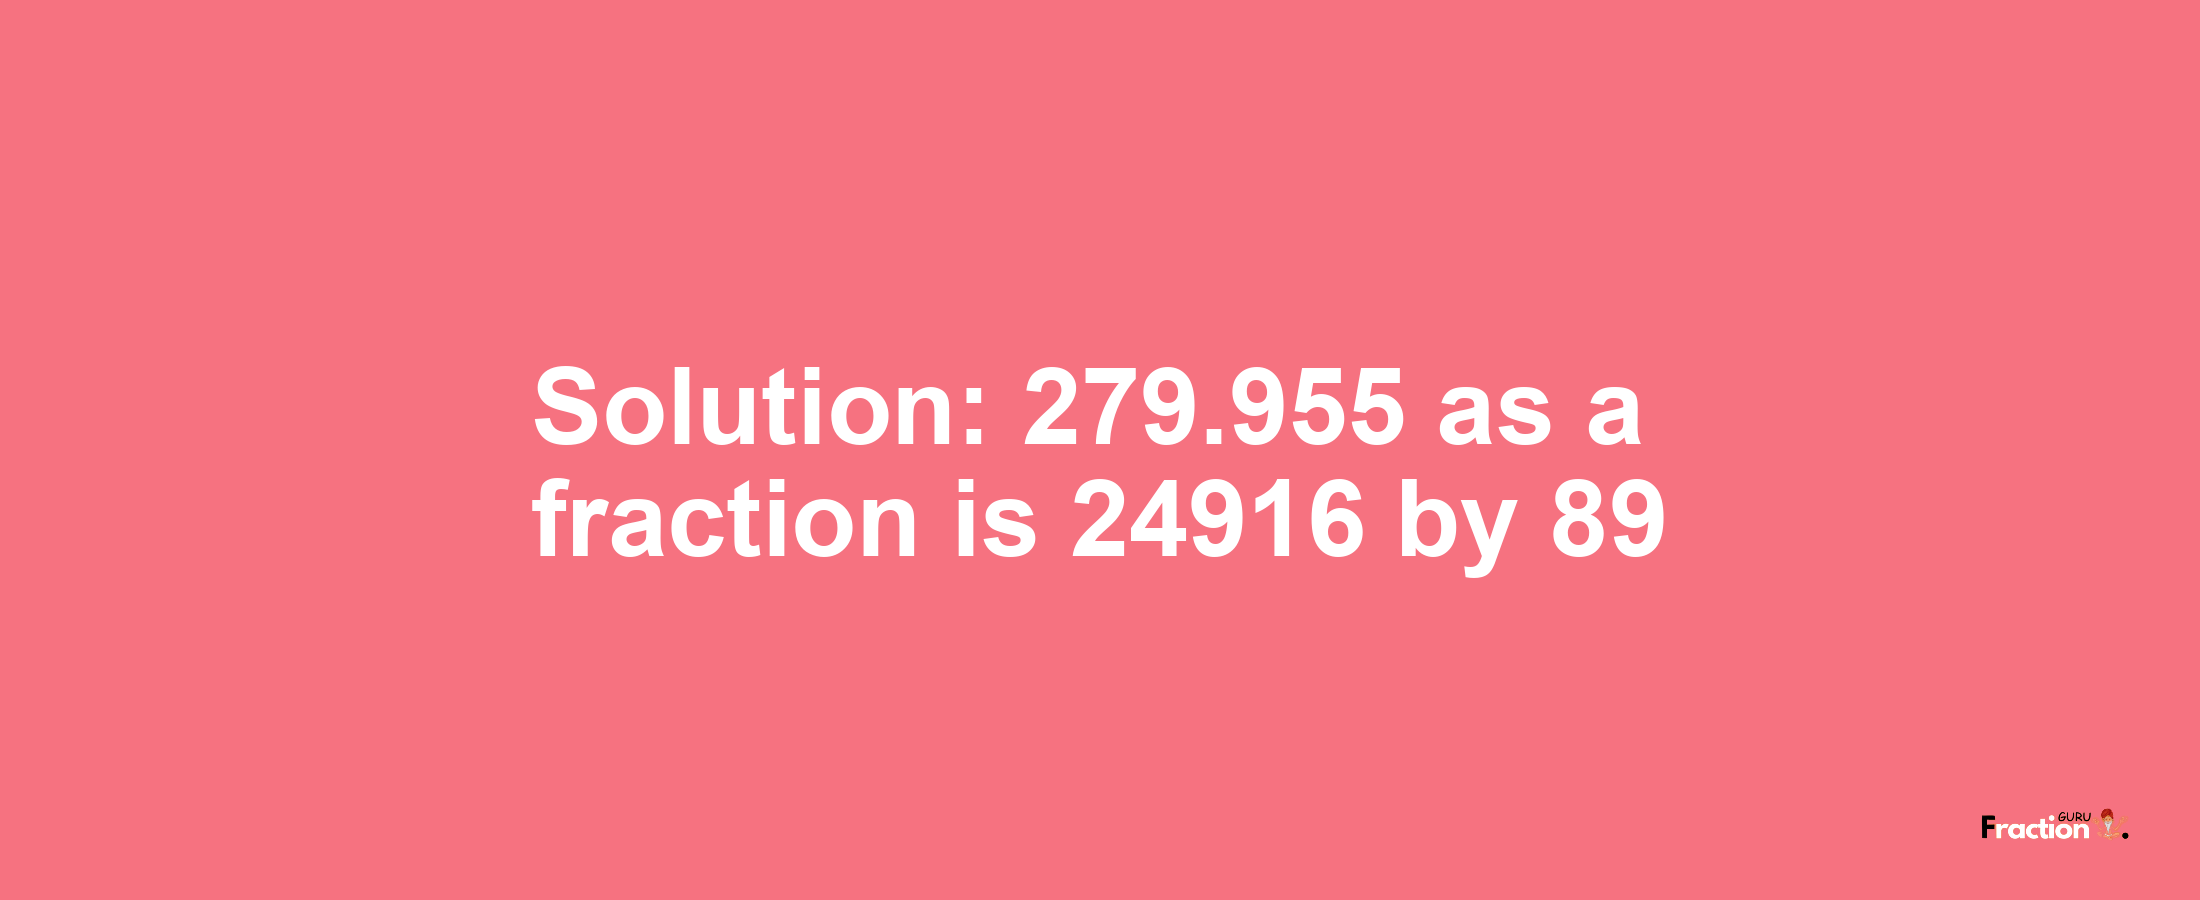 Solution:279.955 as a fraction is 24916/89